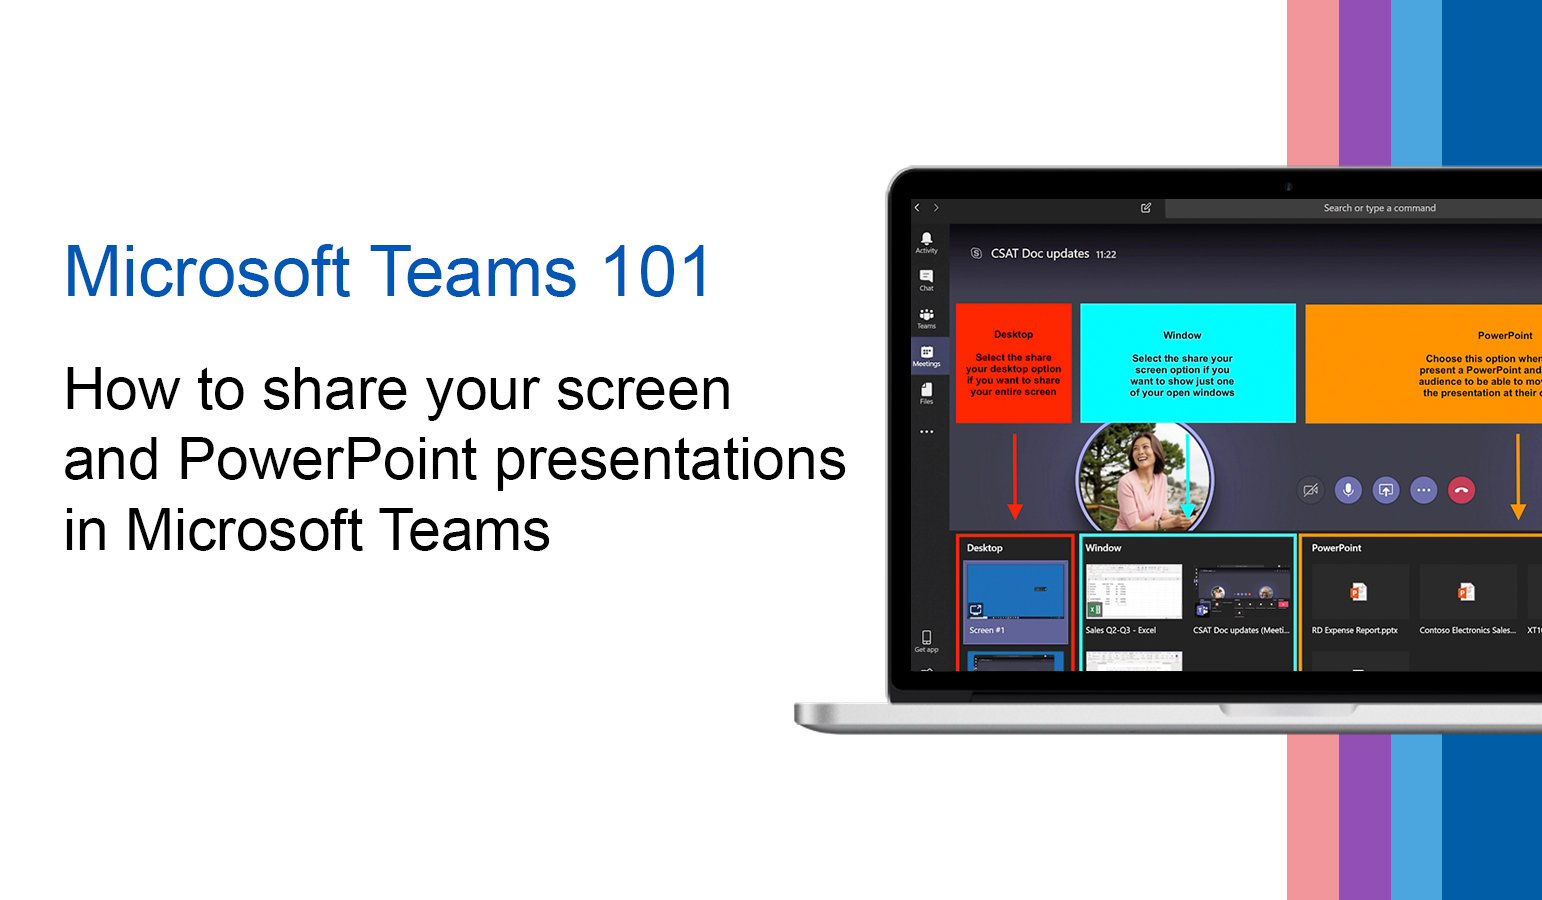 How to share your screen and PowerPoint in Microsoft Teams